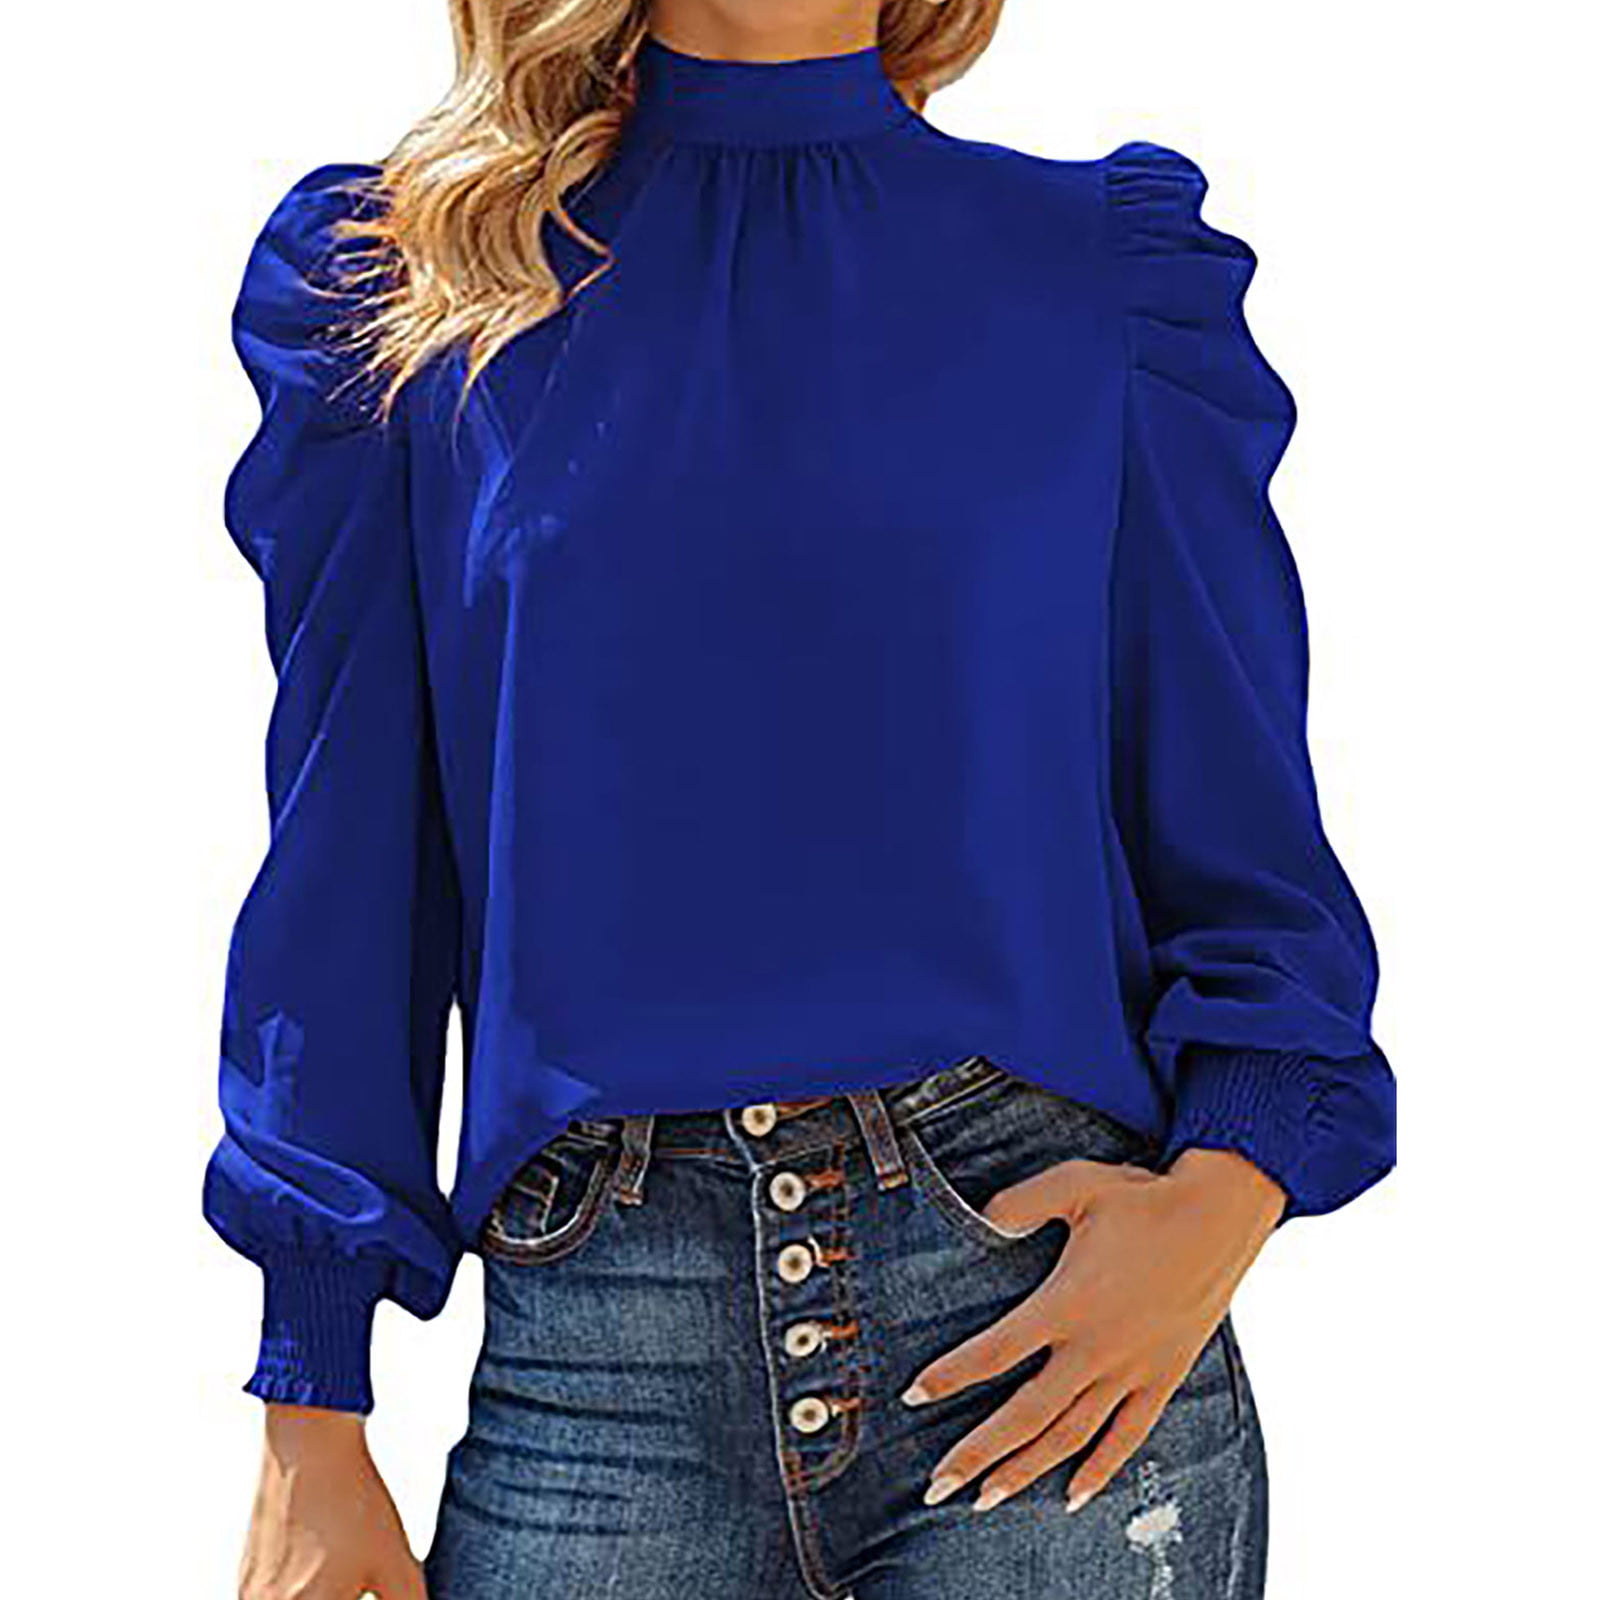 TIHLMK Women Shirts and Blouses Sales Clearance Fashion Women's Round ...